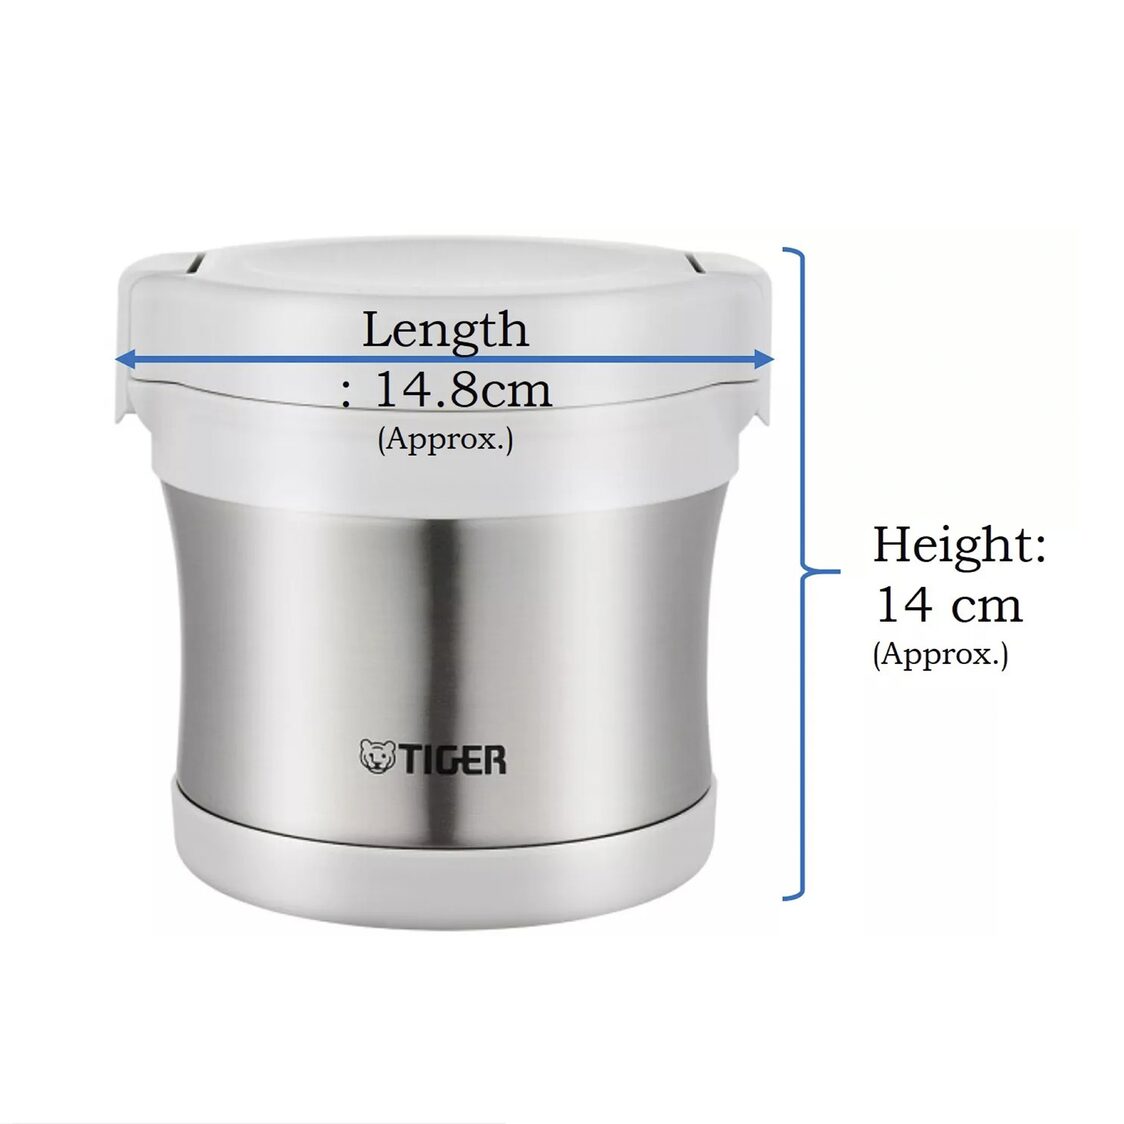 https://media.metro.sg/ProductImages/935608e6-b4cb-4420-a000-89b59c405b85/5/std/tiger-vacuum-insulated-double-stainless-steel-lunch-box-09l-lxb-a100-xc-231209045919.jpg